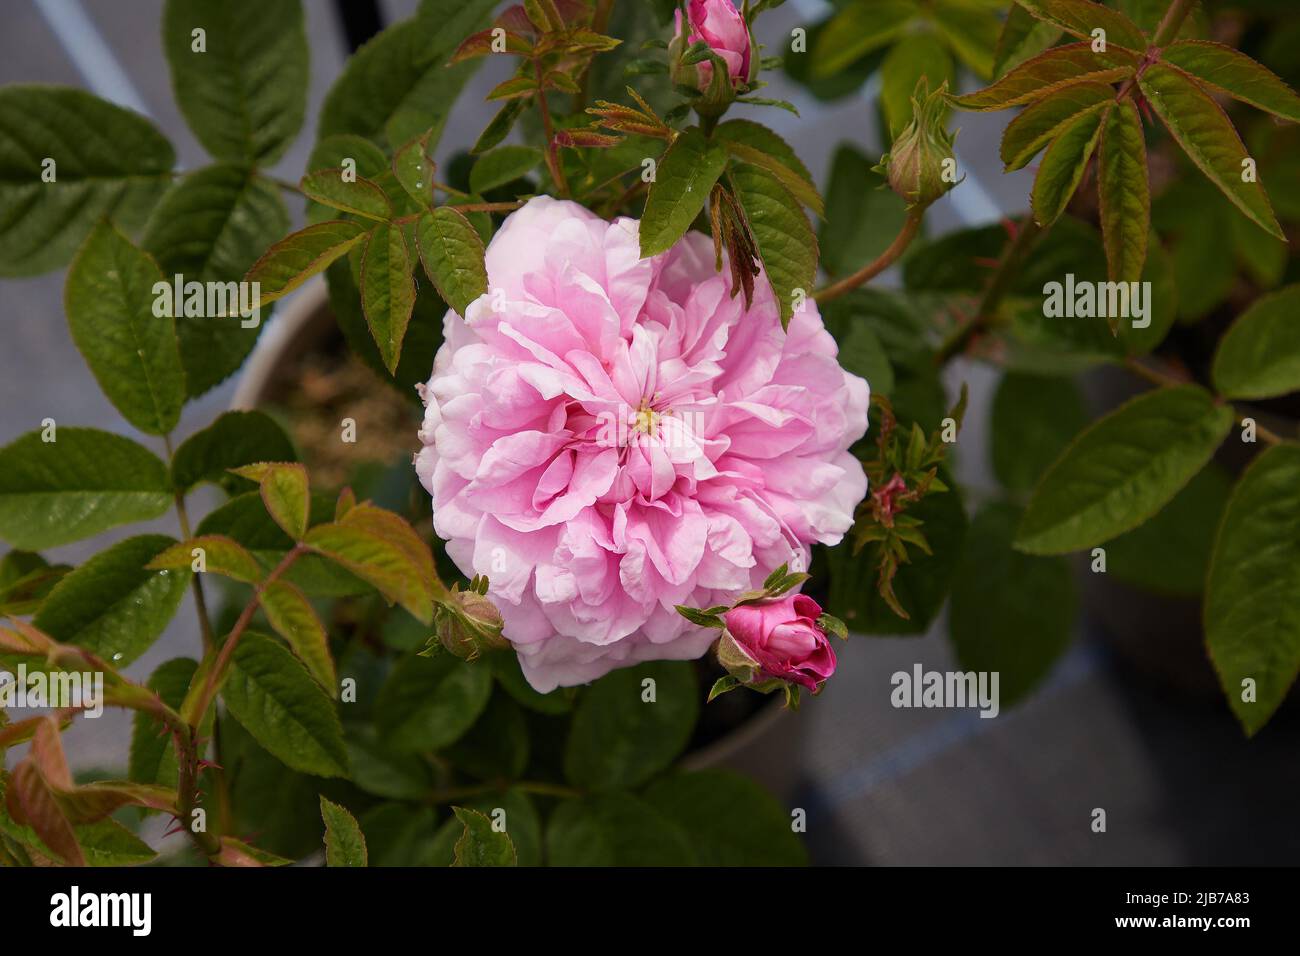 Close up of Rosa Ispahan, an old shrub rose, seen outdoors in the garden. Stock Photo